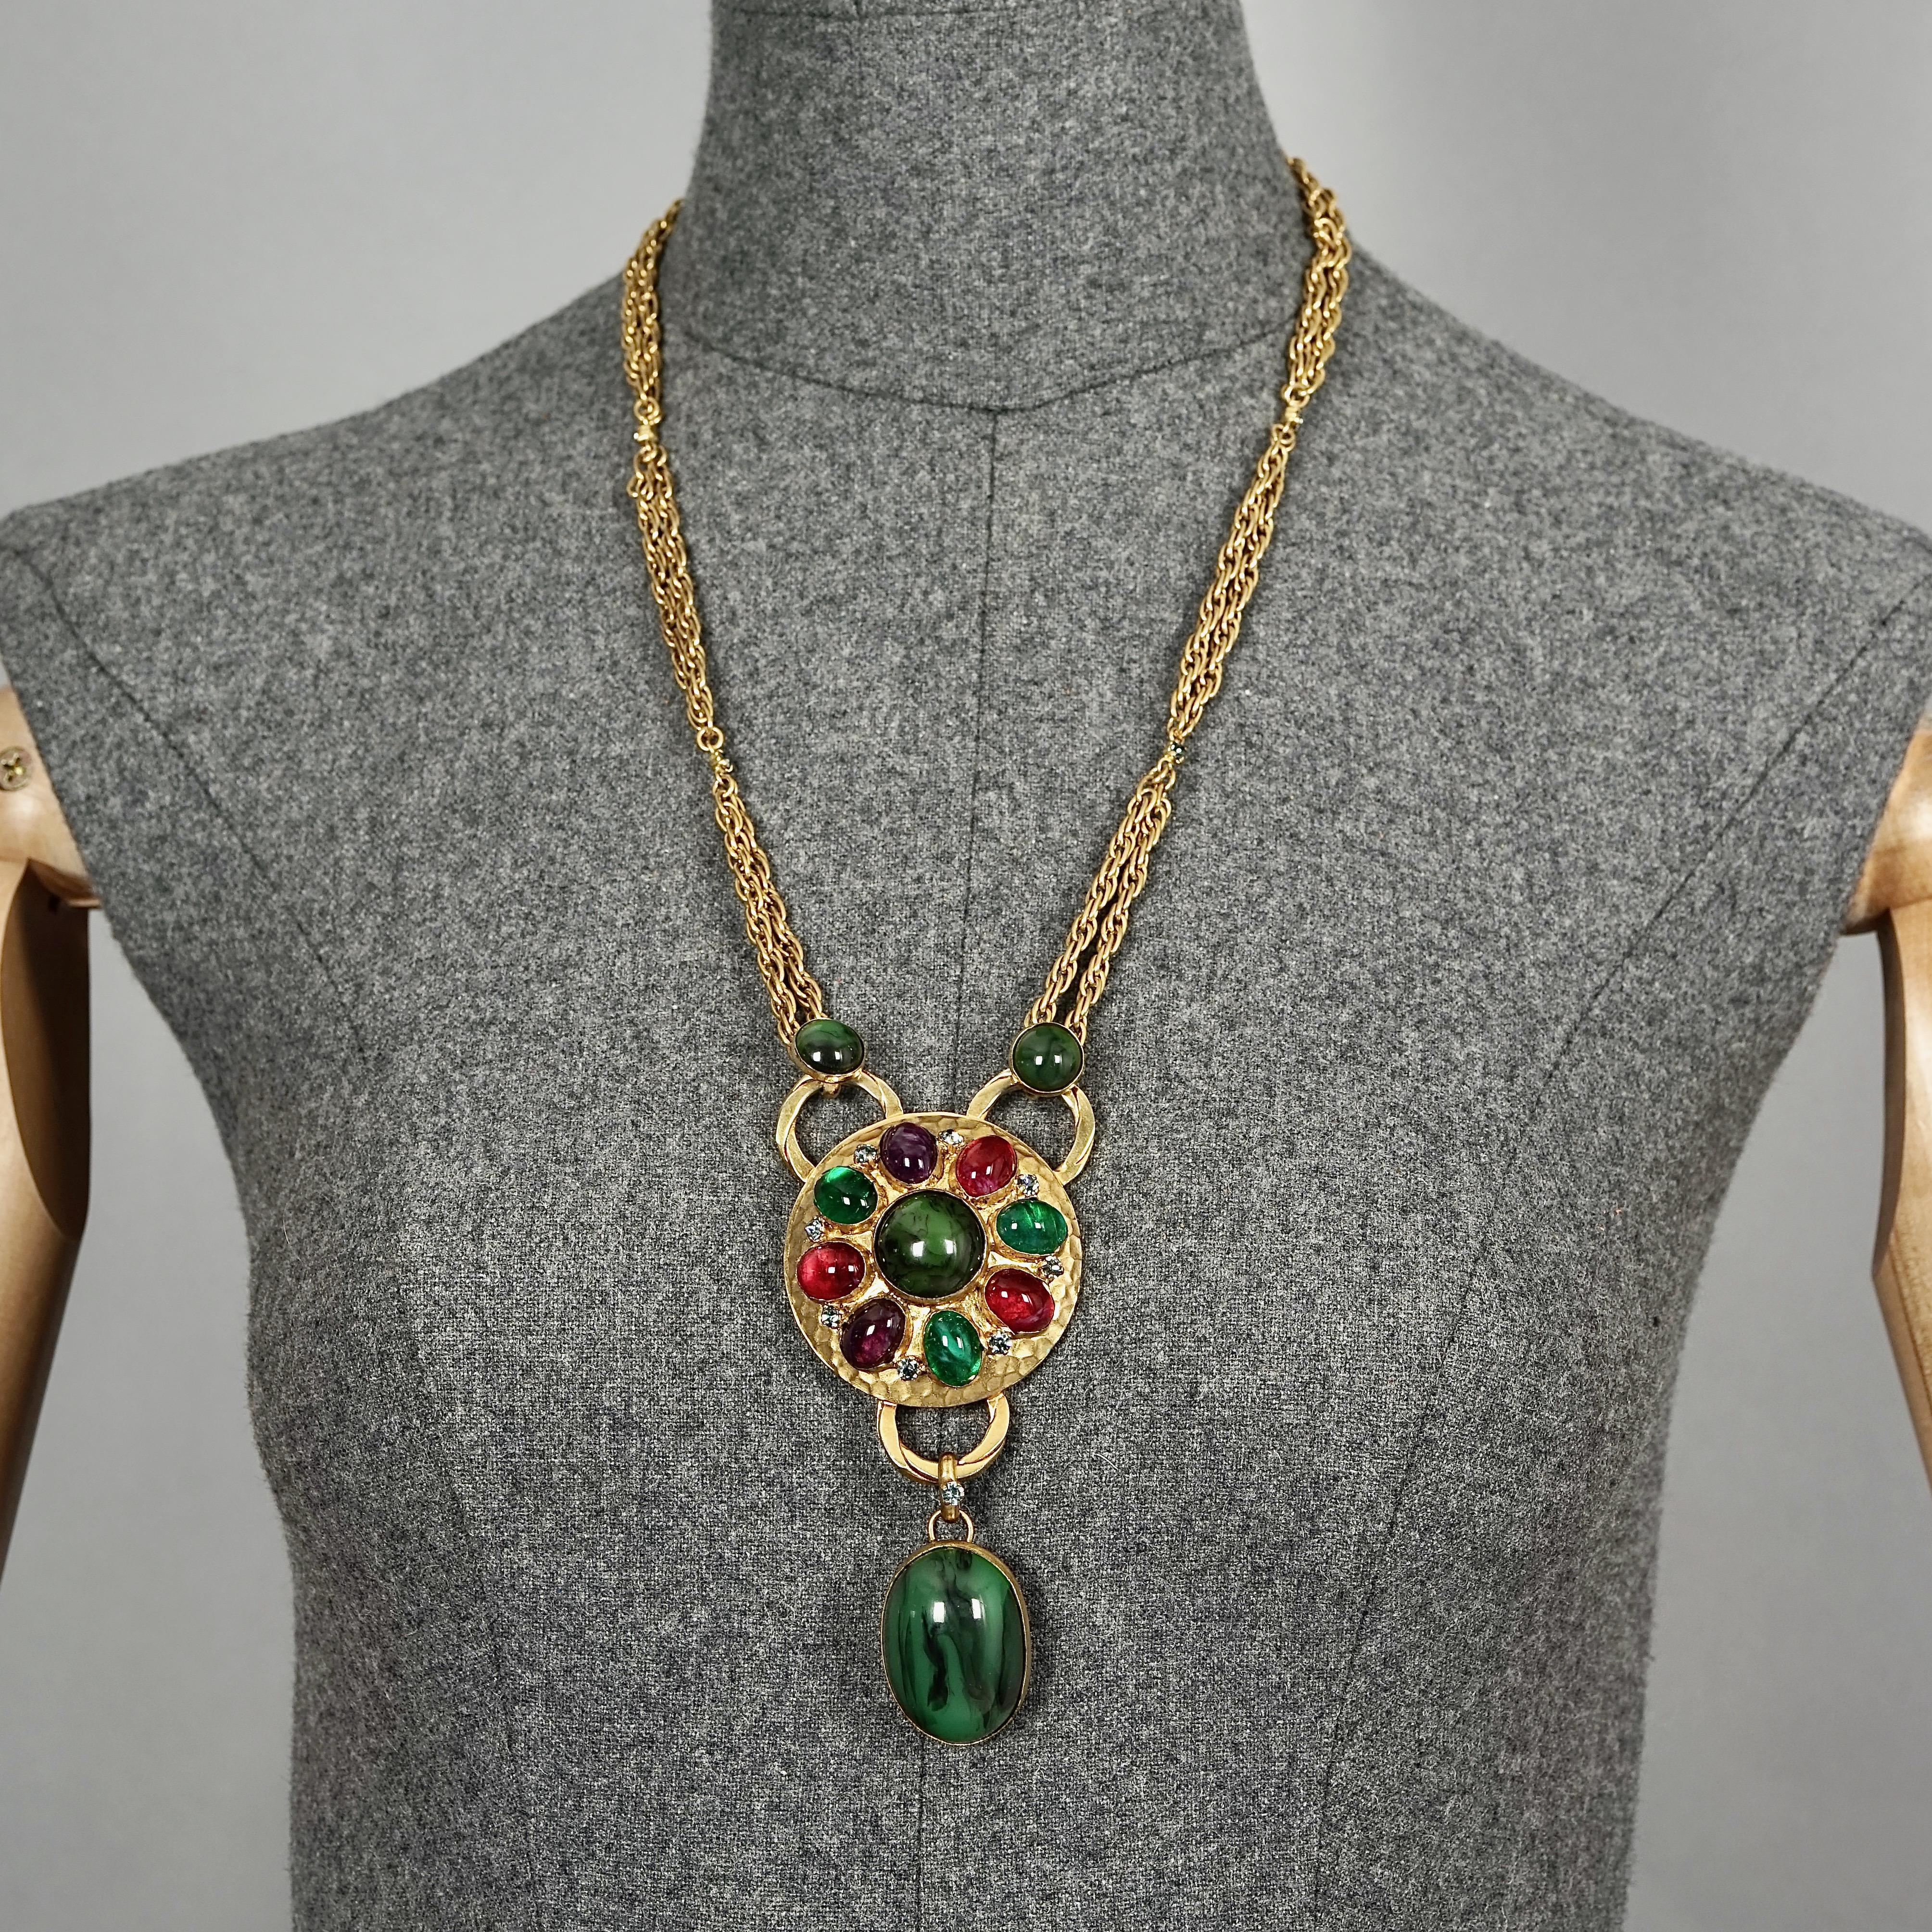 Vintage 1970s ROGER SCEMAMA Jeweled Glass Cabochons Medallion Necklace

Measurements:
Height: 4.33 inches (11 cm)
Wearable Length: 23.22 inches (59 cm)

Features:
- 100% Authentic ROGER SCEMAMA.
- Jeweled medallion with colored glass cabochons and